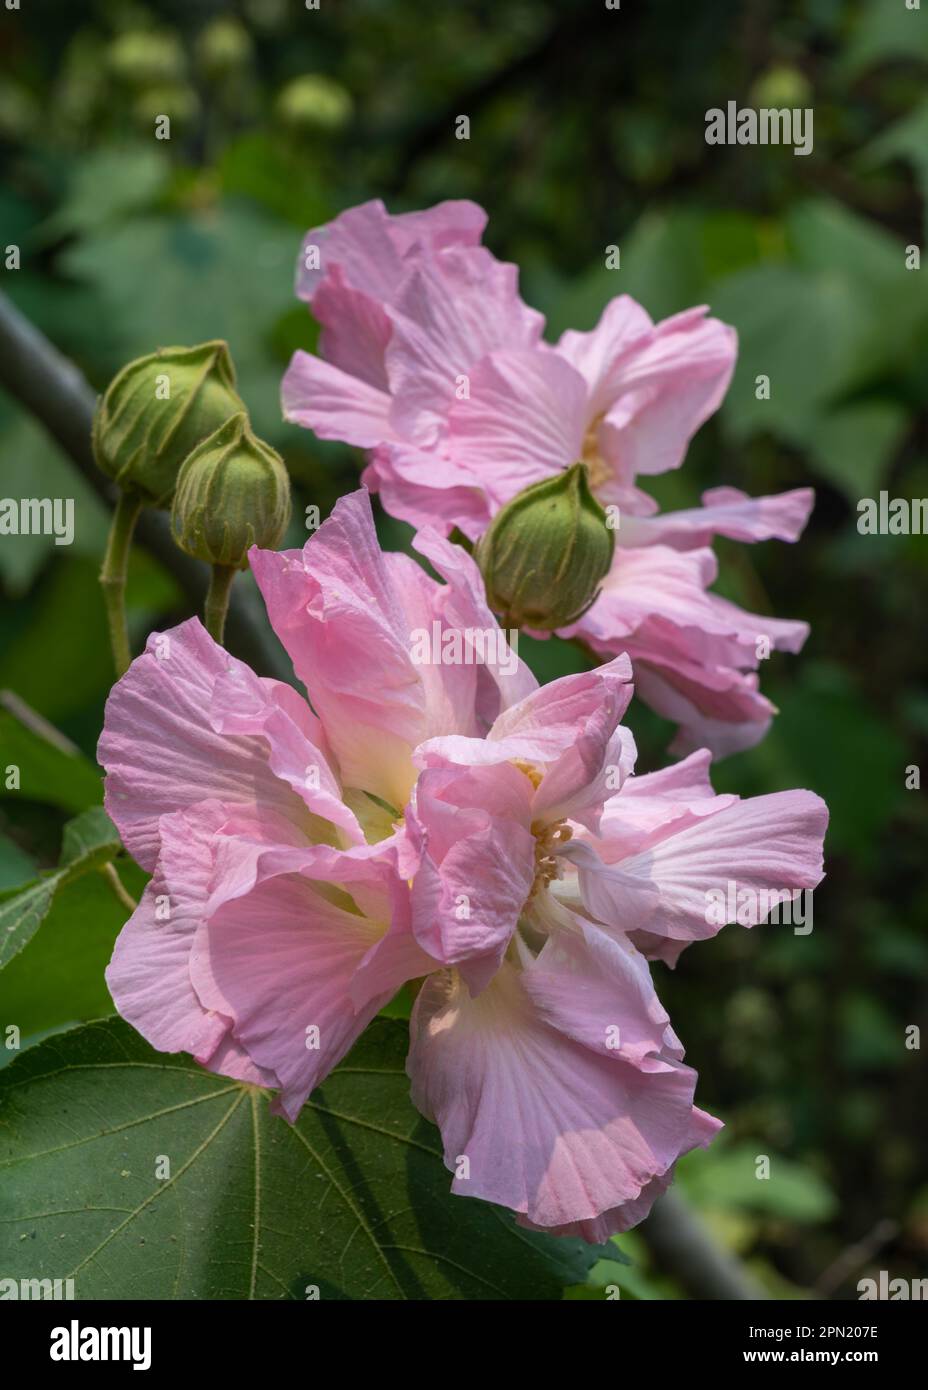 Closeup view of white turning pink tropical hibiscus mutabilis aka Confederate rose or Dixie rosemallow flowers and buds outdoors in bright sunlight Stock Photo